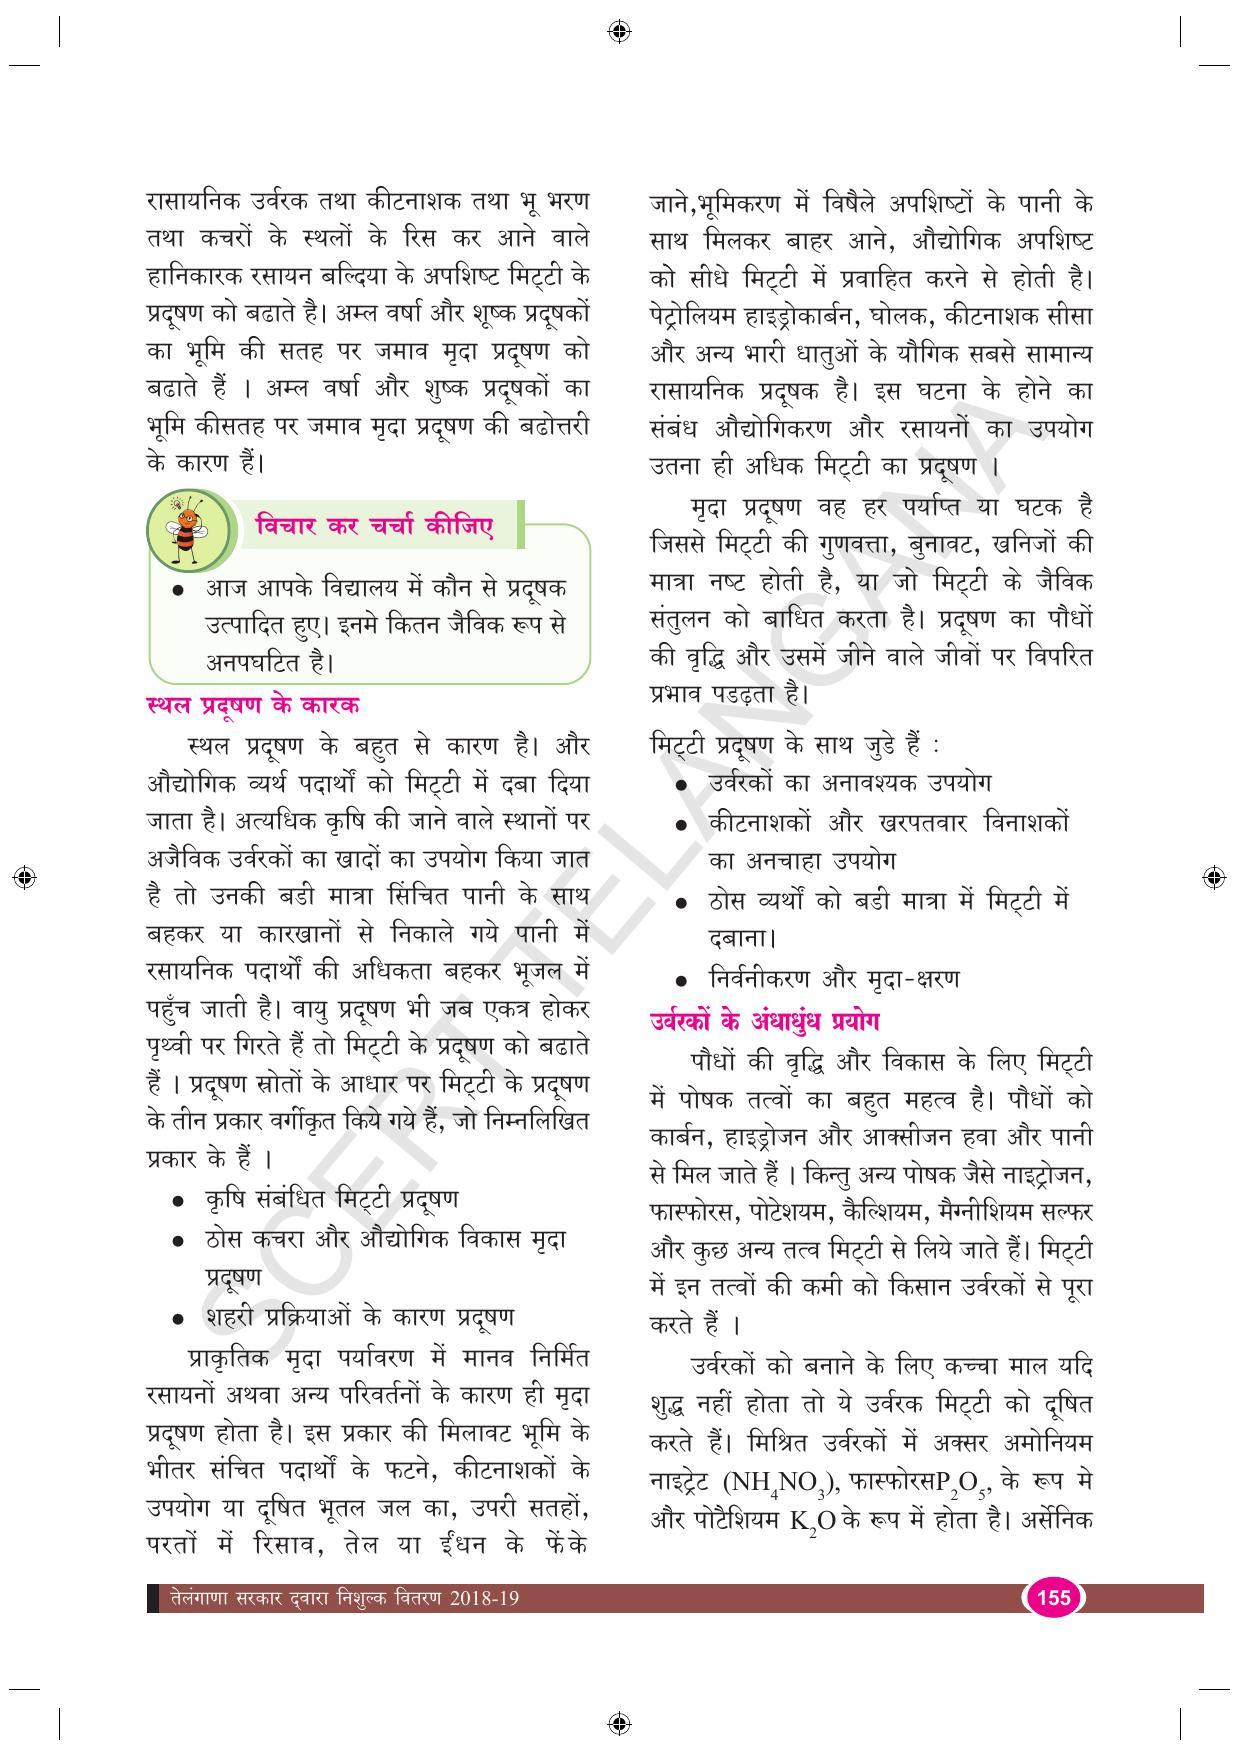 TS SCERT Class 9 Biological Science (Hindi Medium) Text Book - Page 167